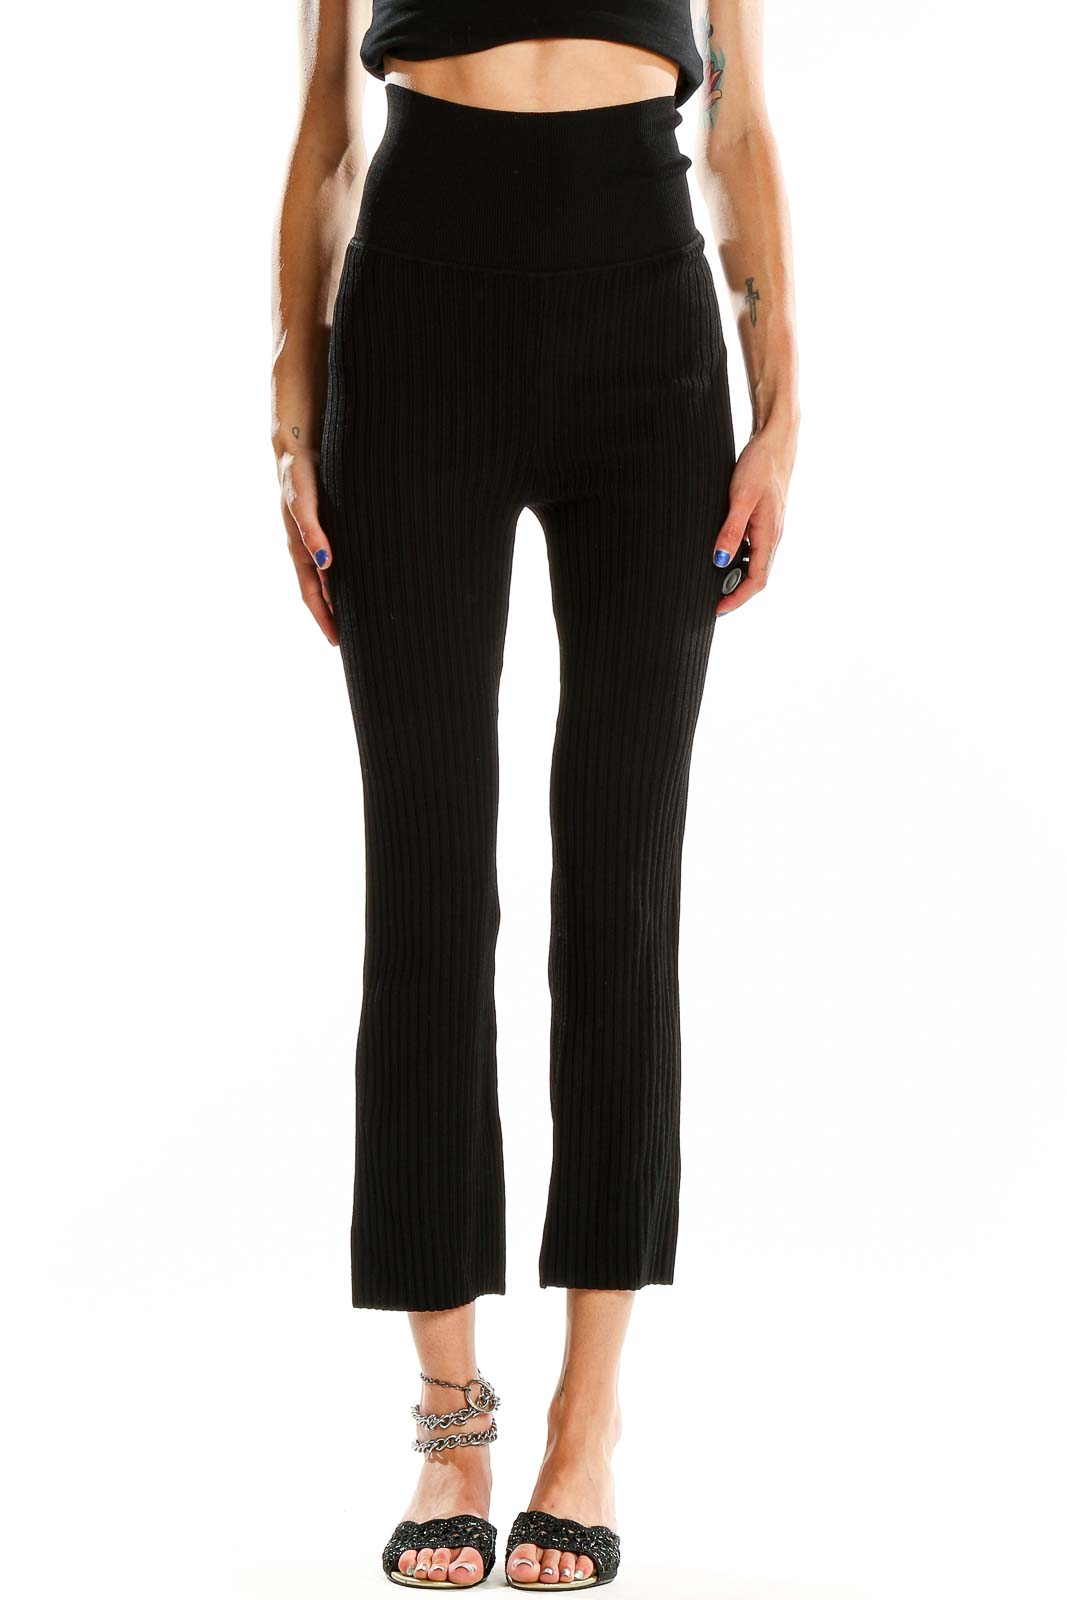 Black Classic Flare Texture Casual Trouser Front